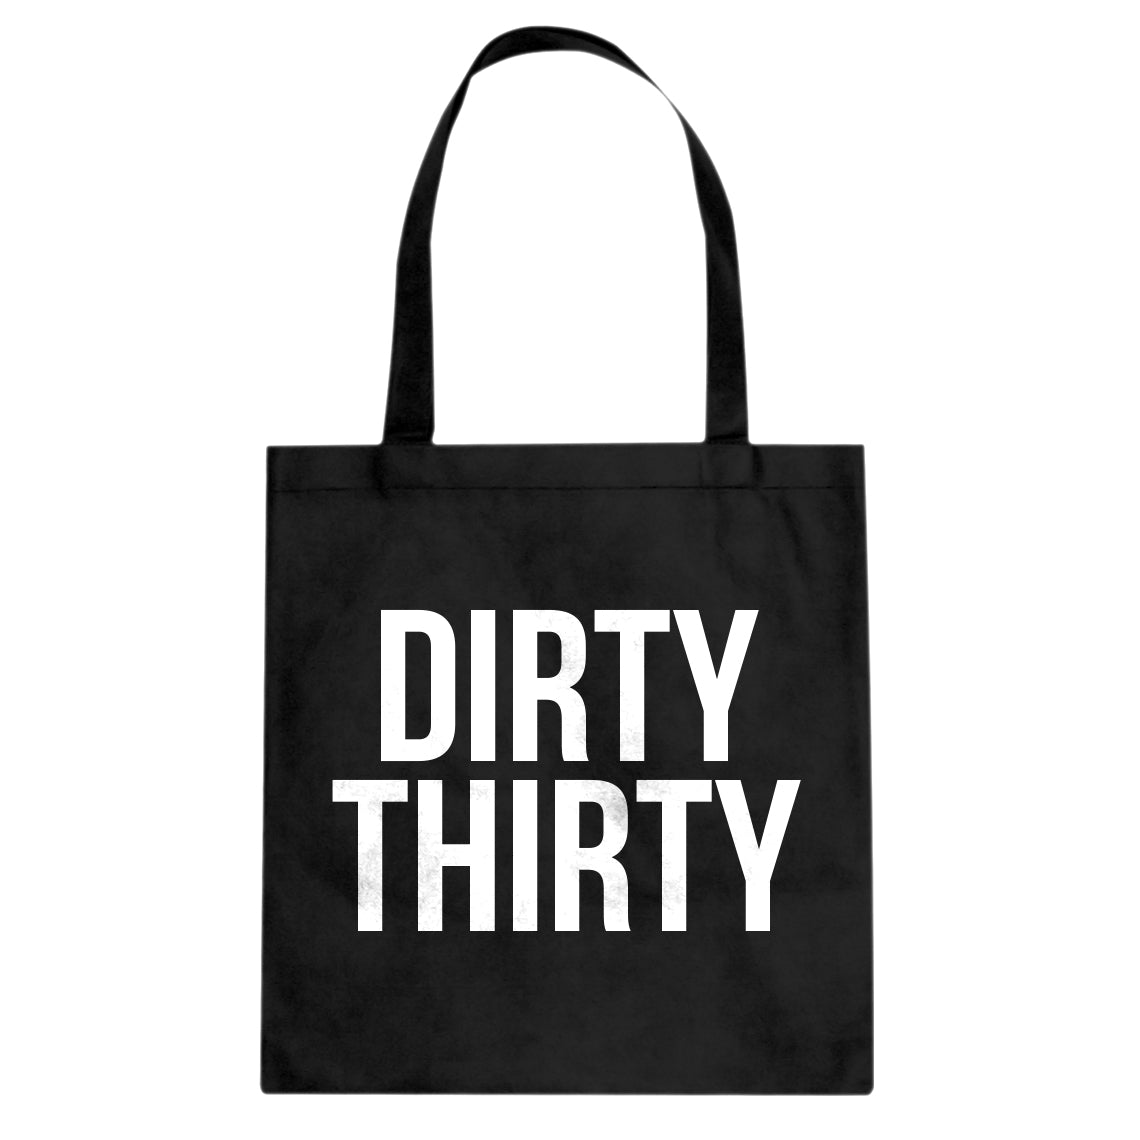 Tote Dirty Thirty Canvas Tote Bag